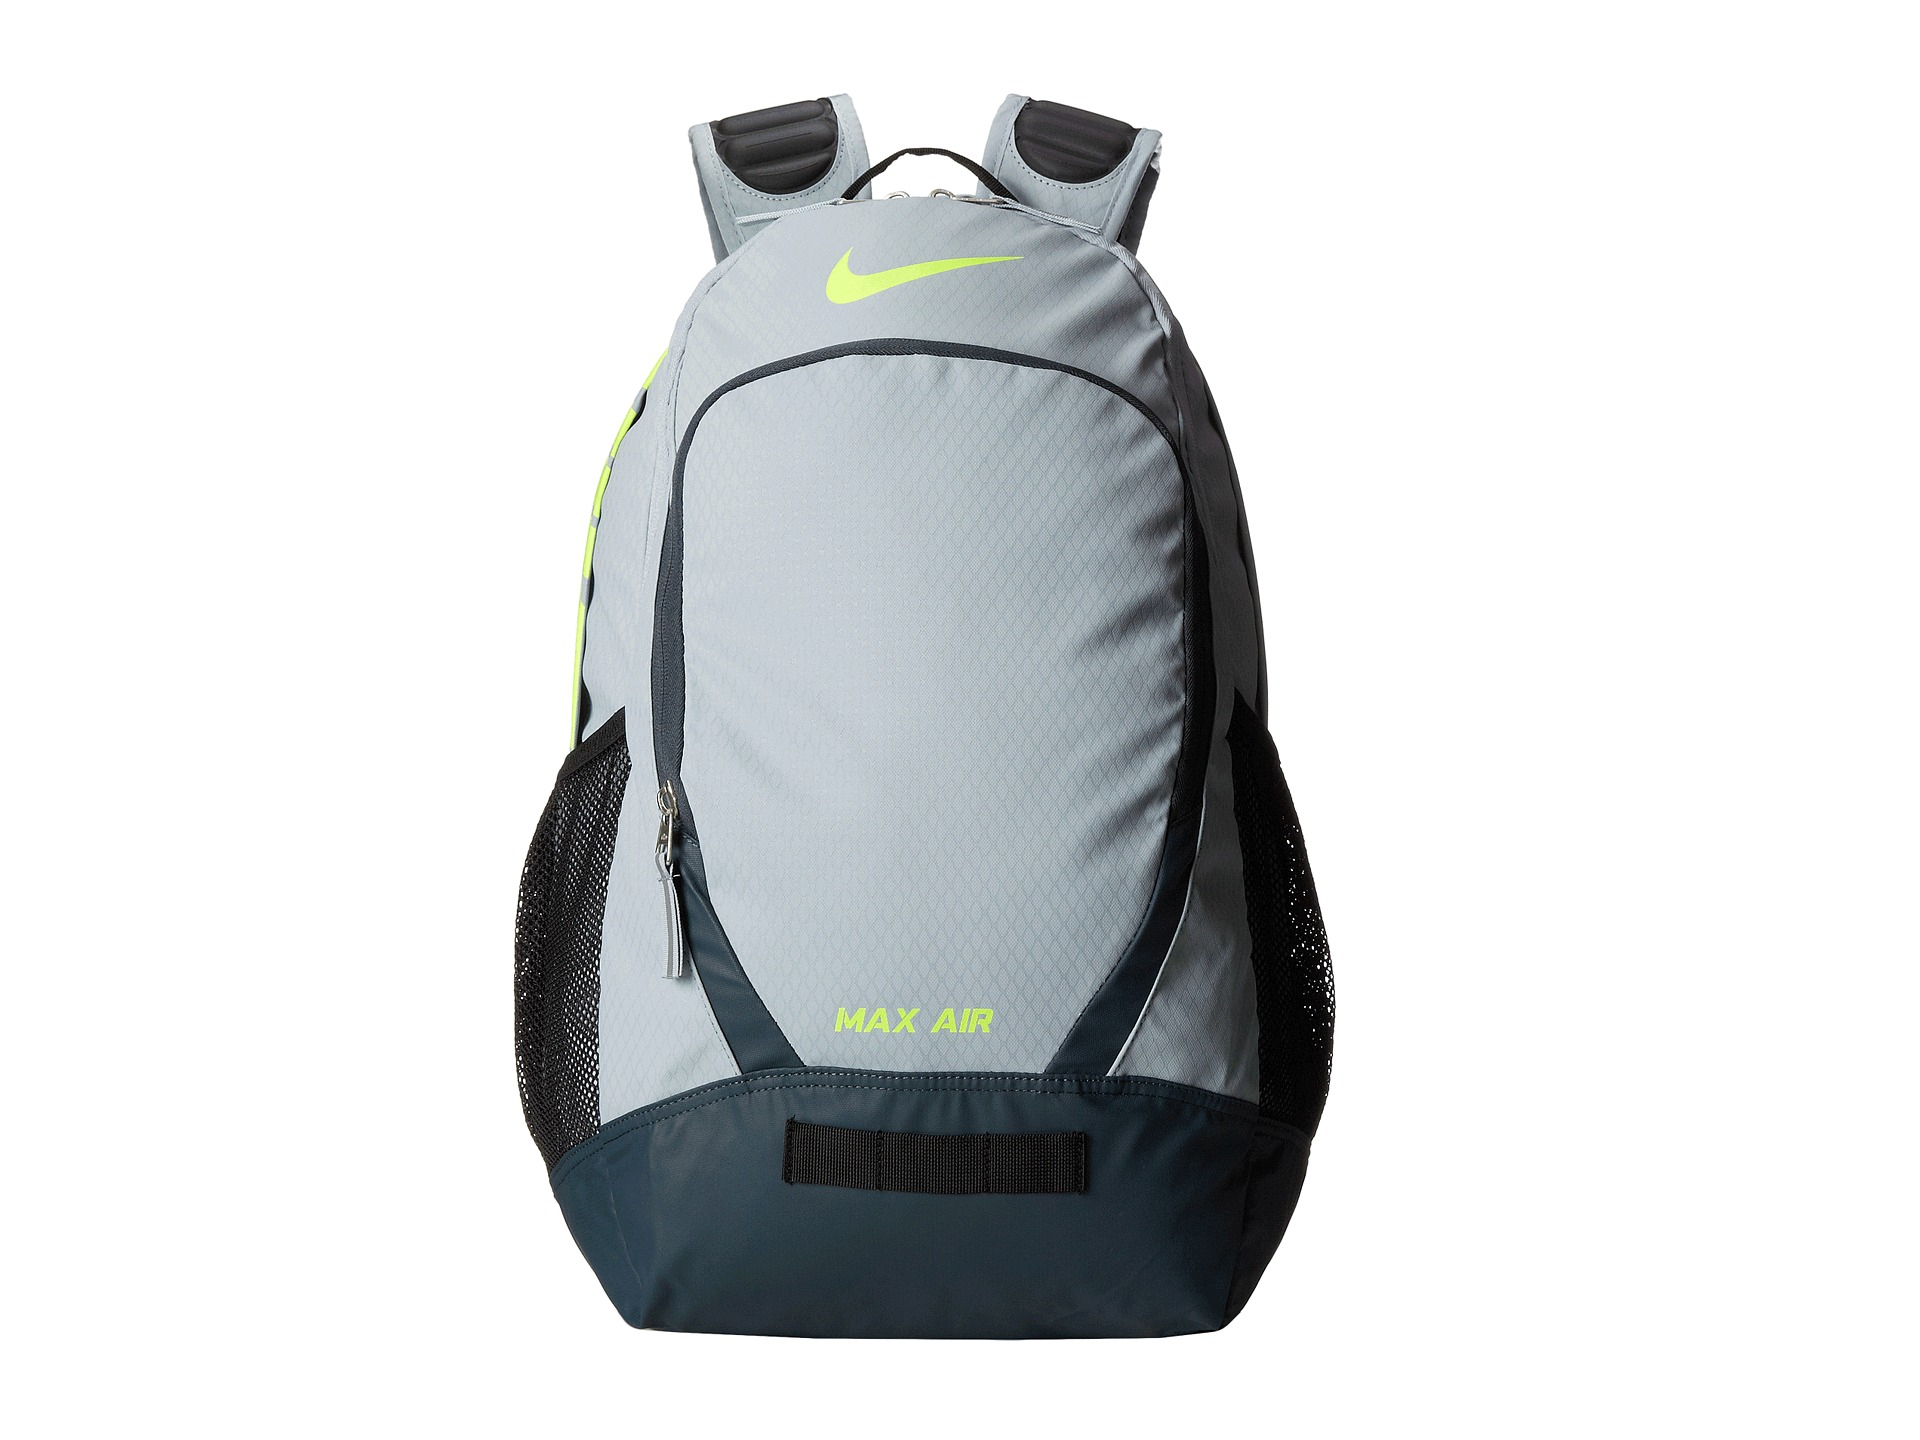 Lyst - Nike Team Training Max Air Large Backpack in Gray for Men